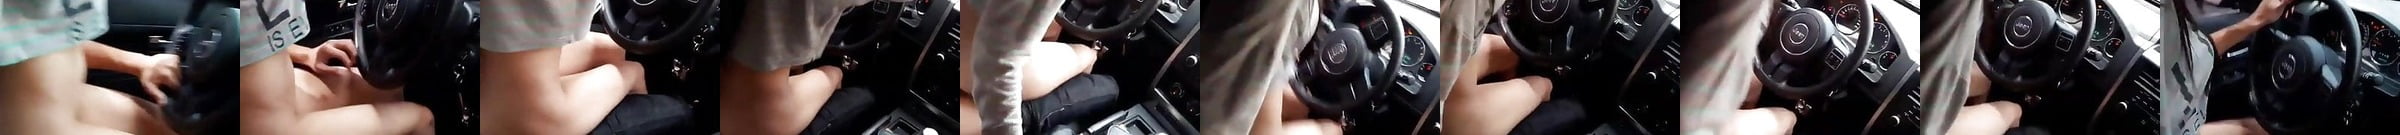 Featured Car Porn Videos 34 Xhamster